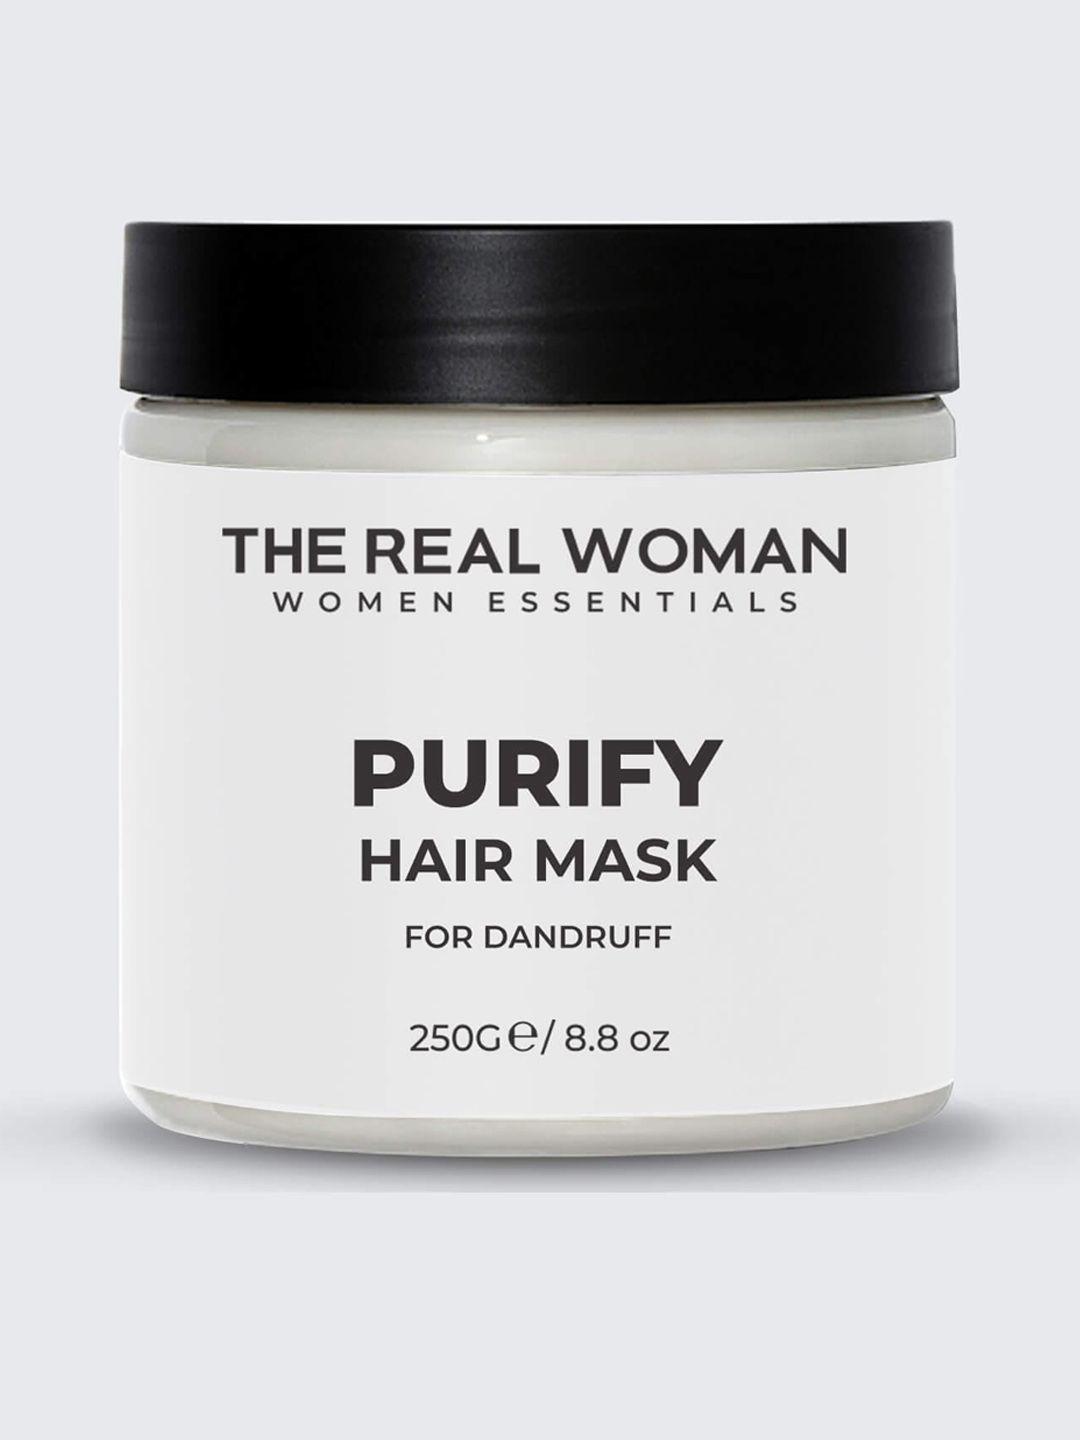 the real woman purify hair mask for dandruff - 200 g